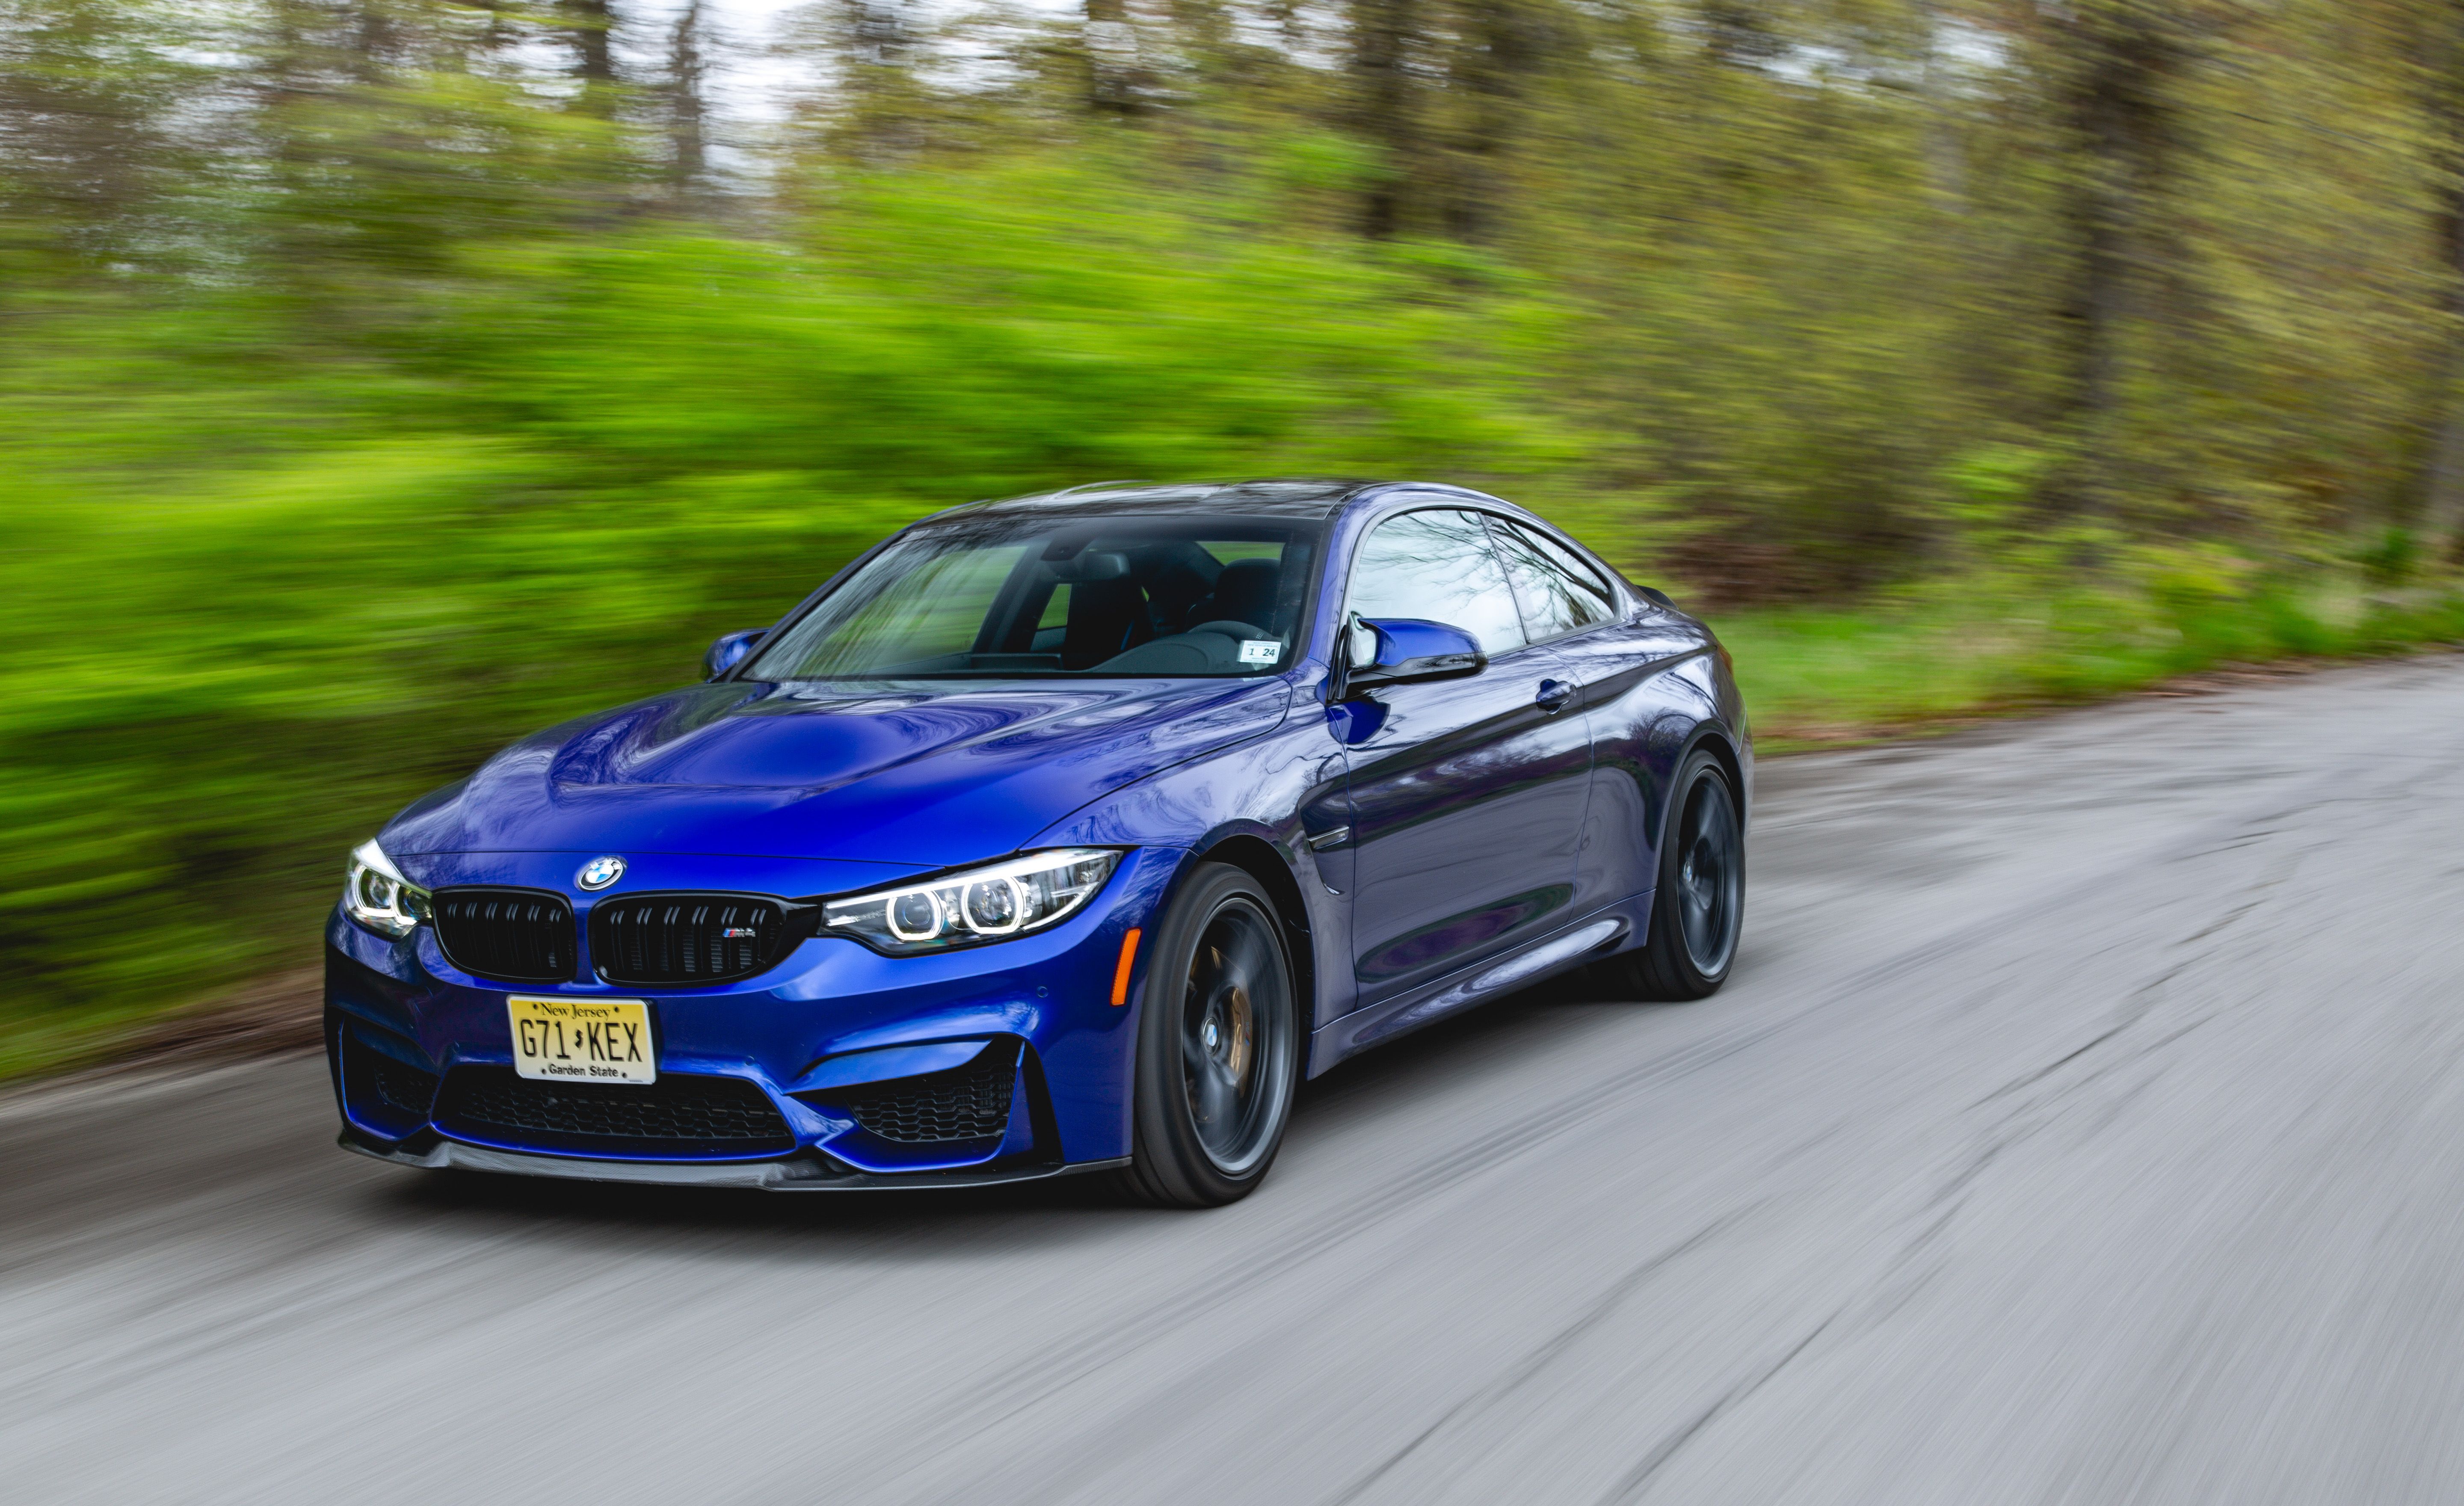 Tested: 2019 BMW M4 CS Is One for the Faithful